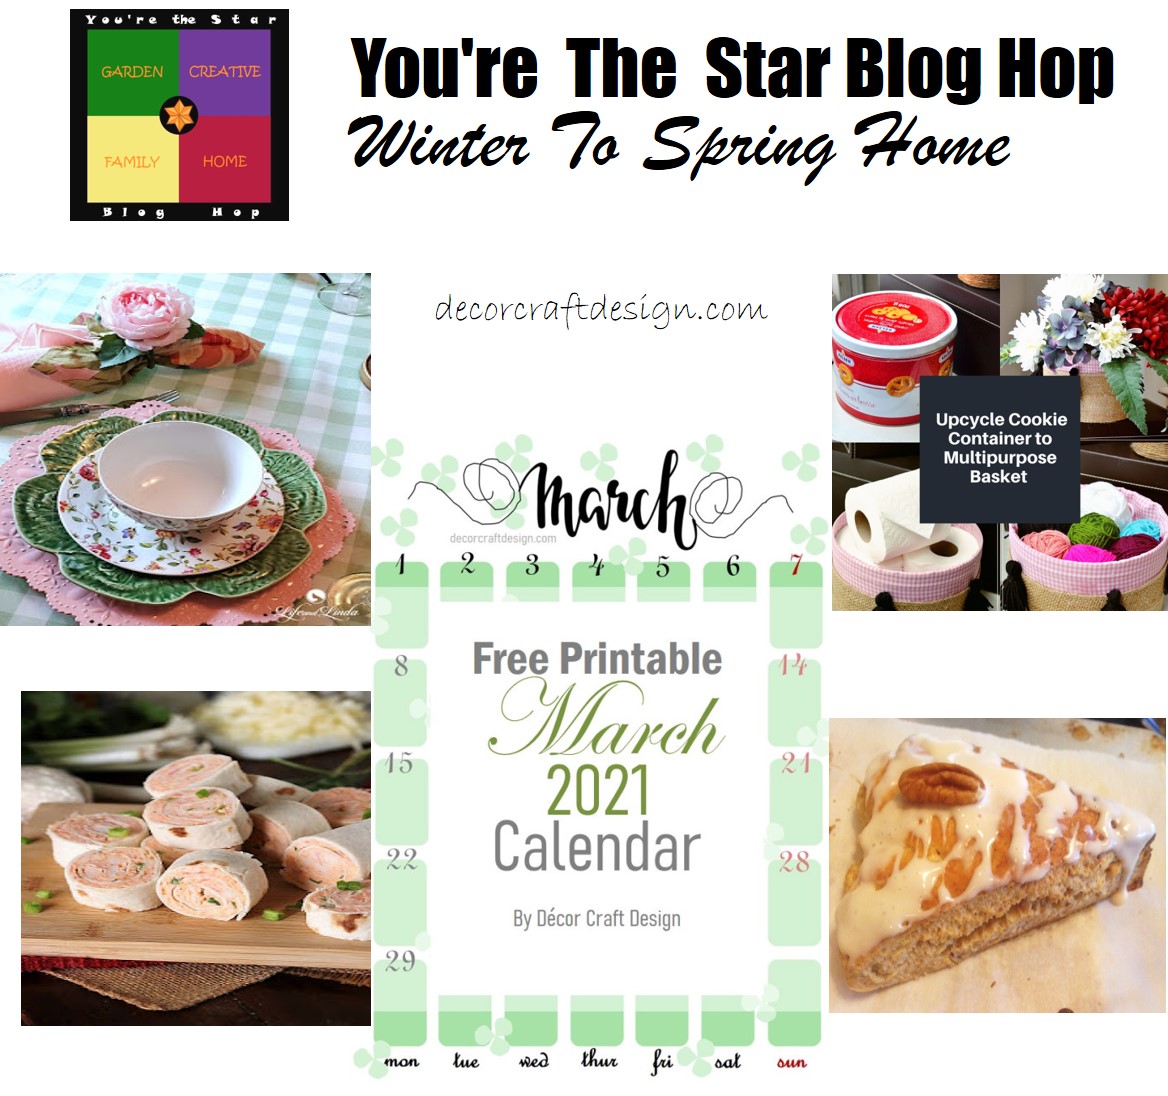 You’re The Star Blog Hop Winter To Spring Home